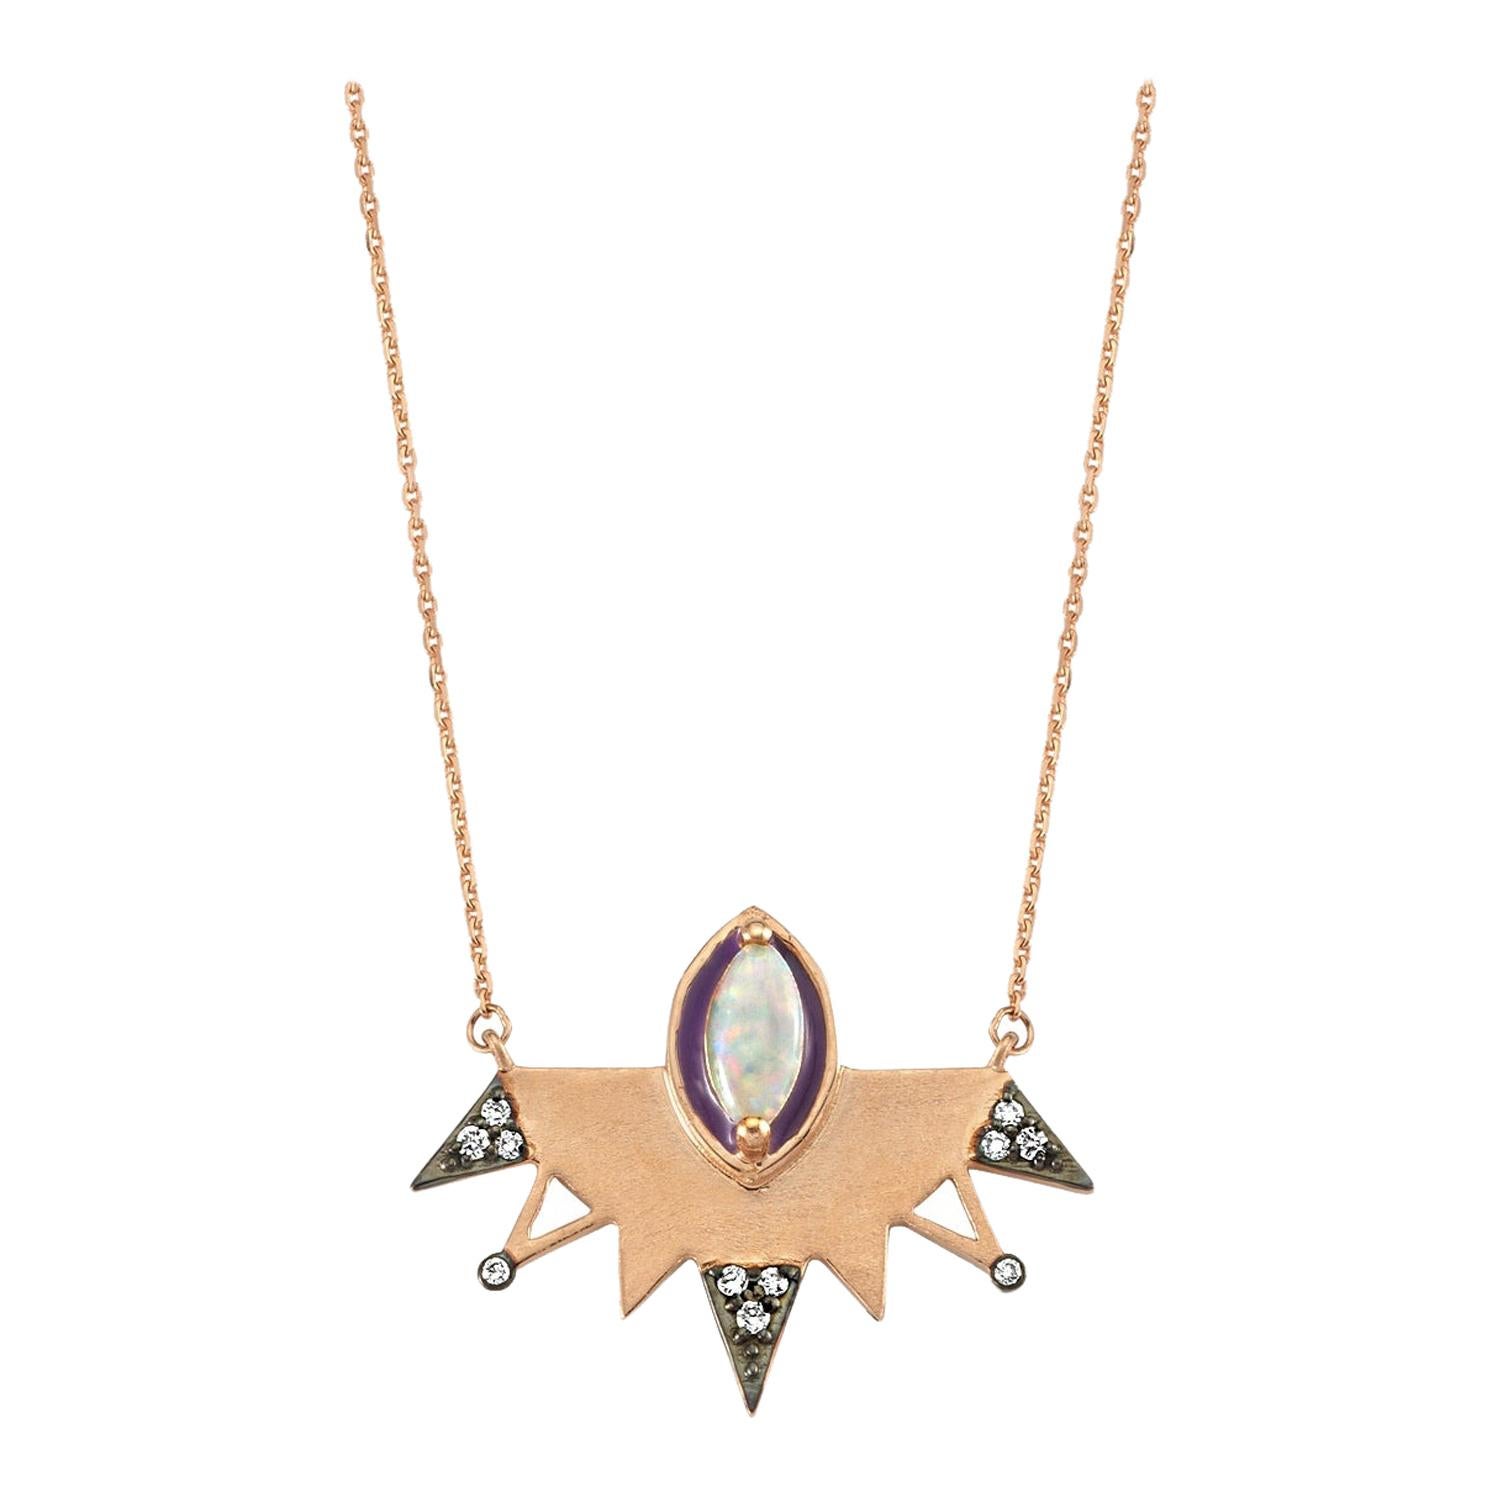 Aisa White Opal Necklace in 14 Karat Rose Gold with White Diamond